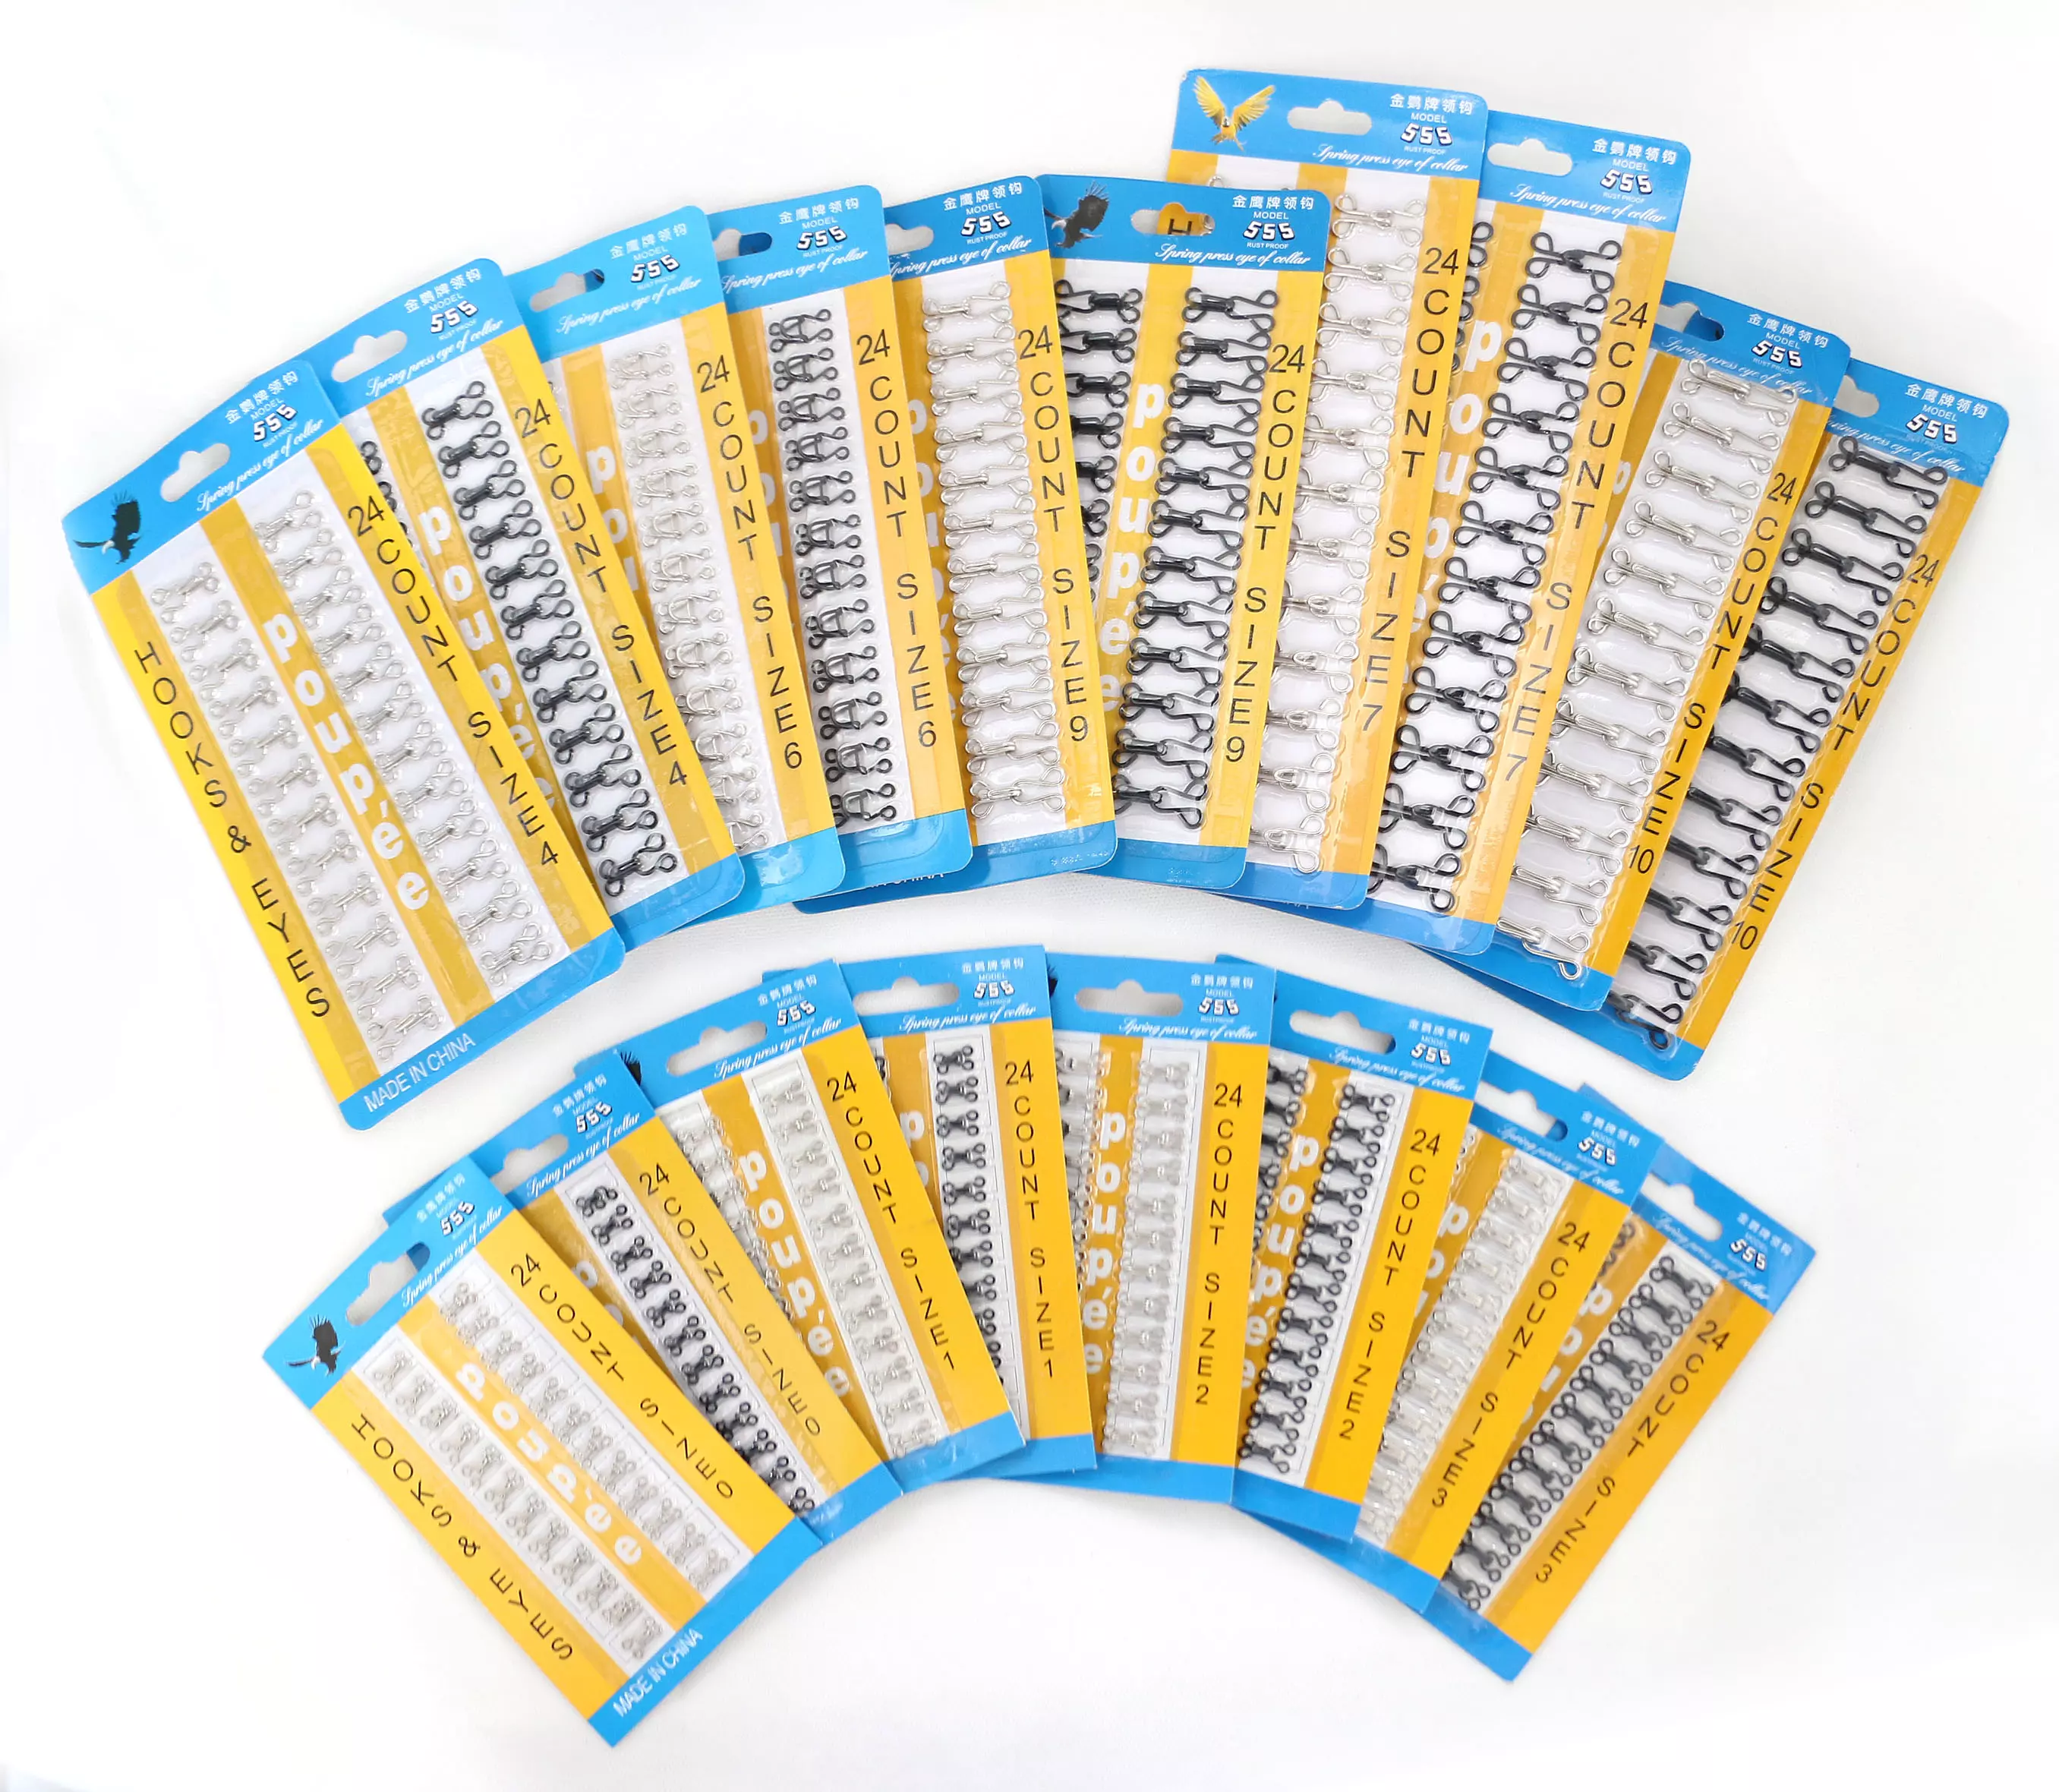 Hook and Eyes (100 pack) – Sewing Supply Depot